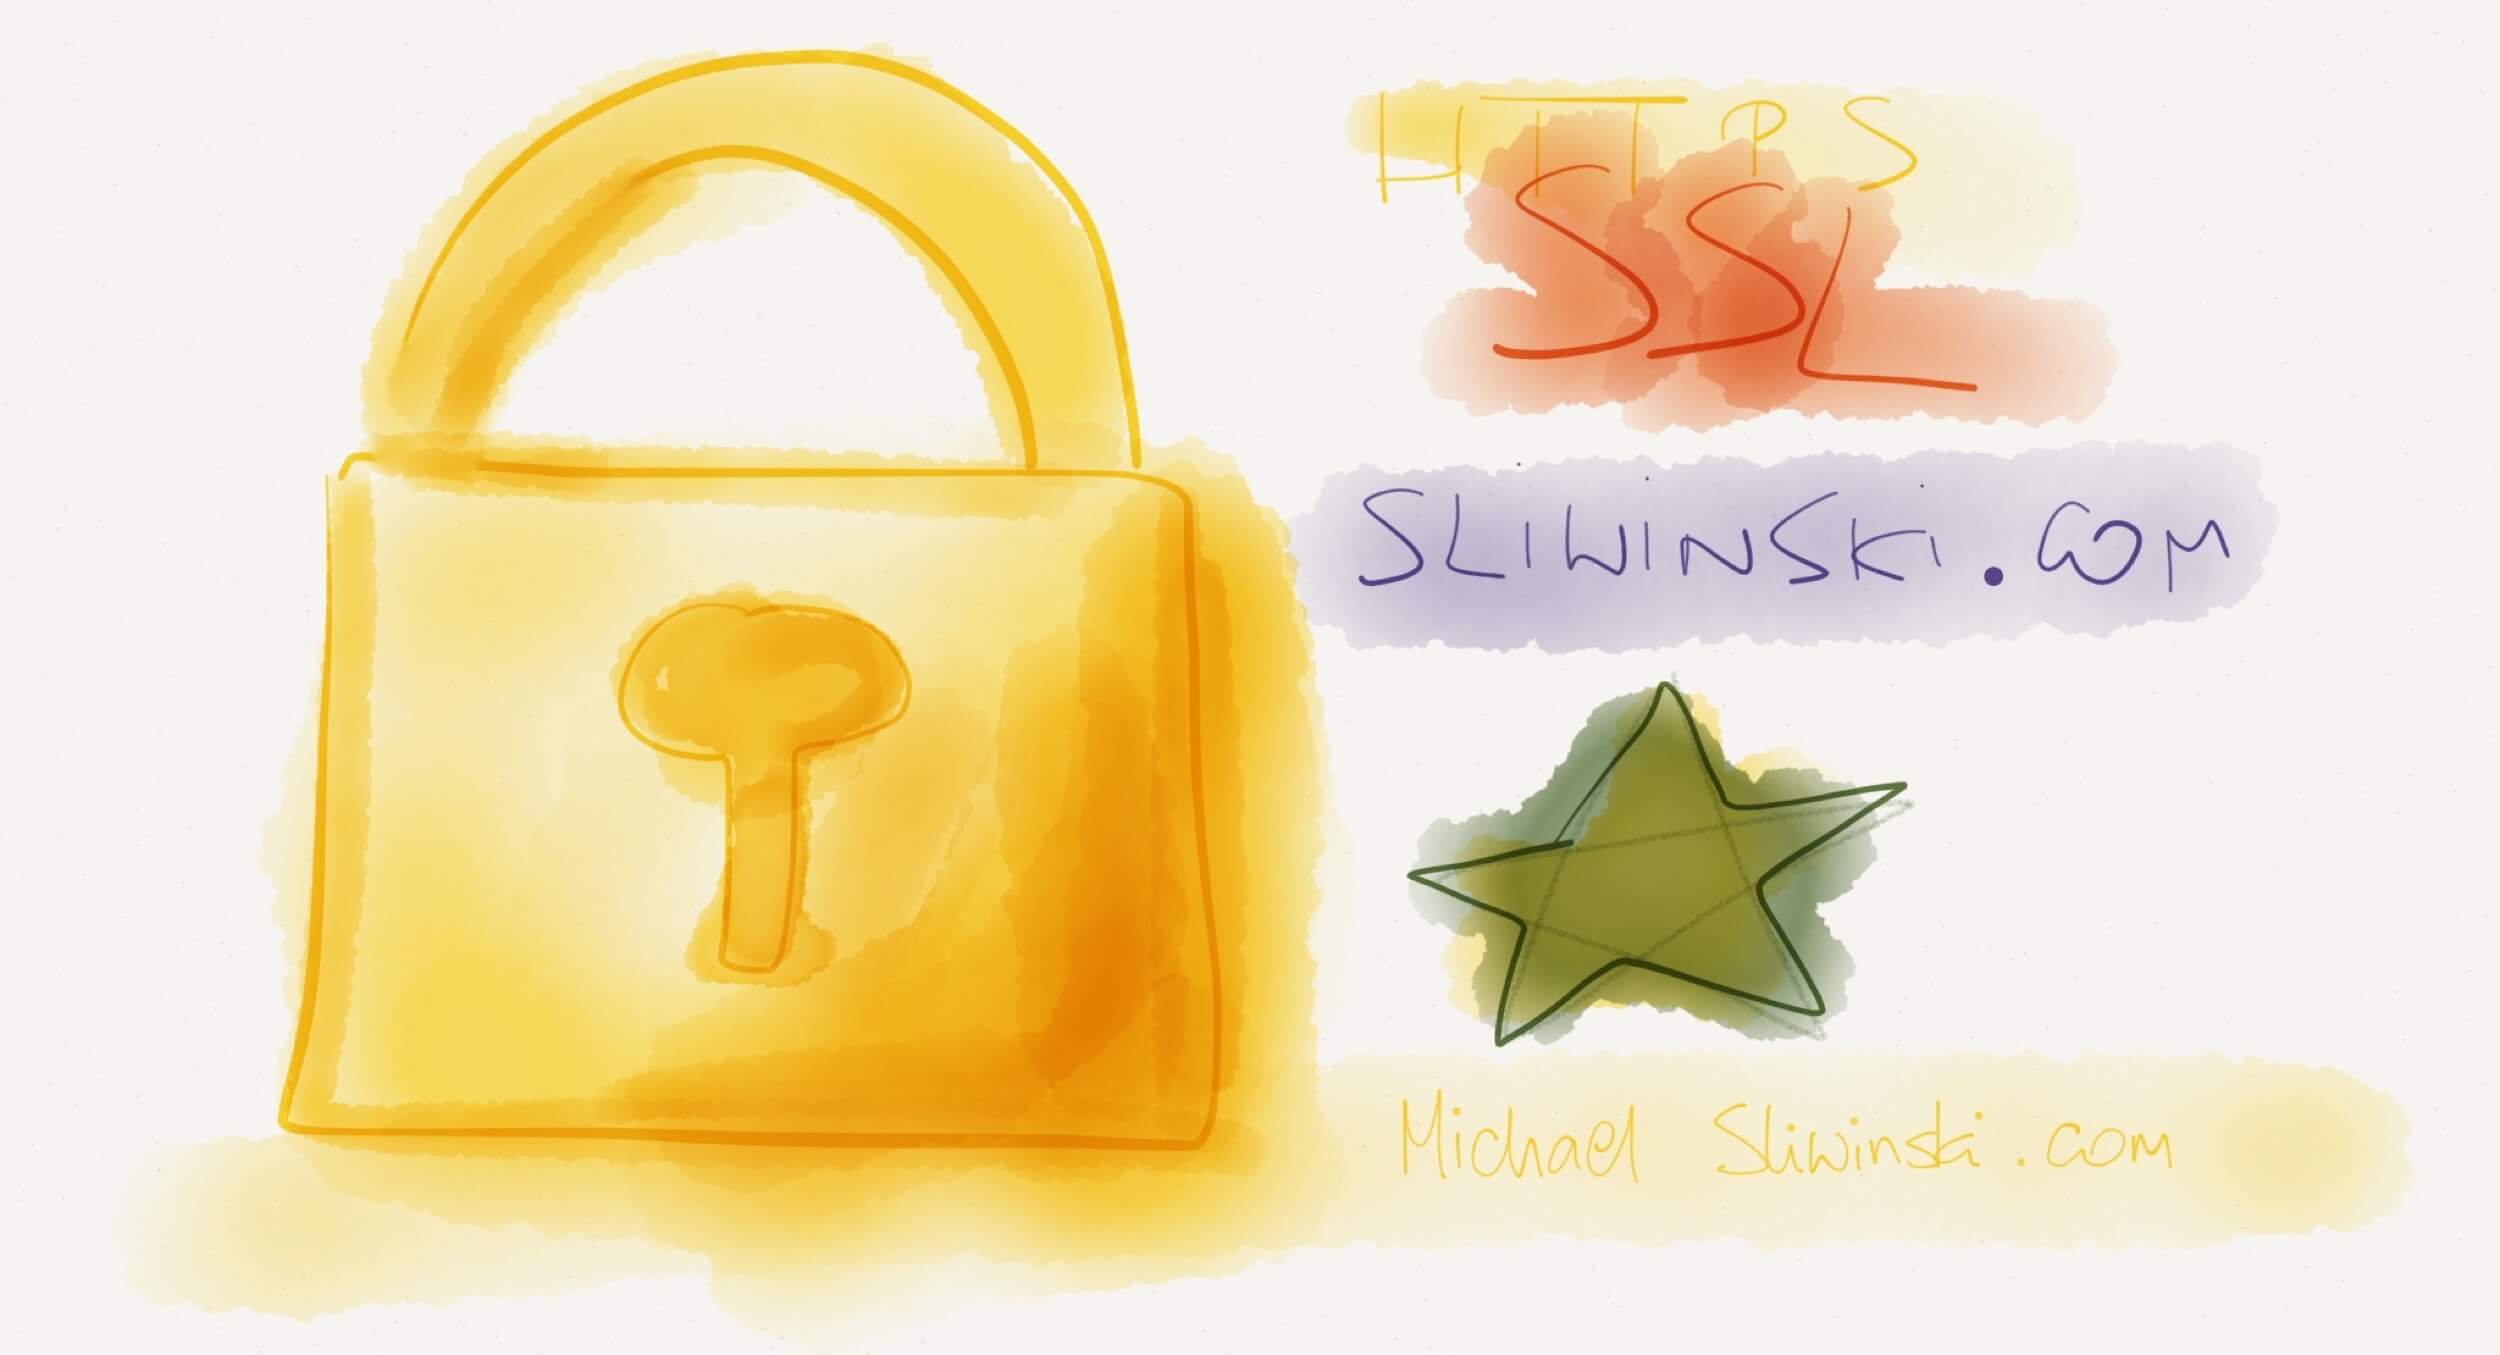 3 changeS with a capital “S” to my blog: SSL, Sliwinski.com and a Star “★”